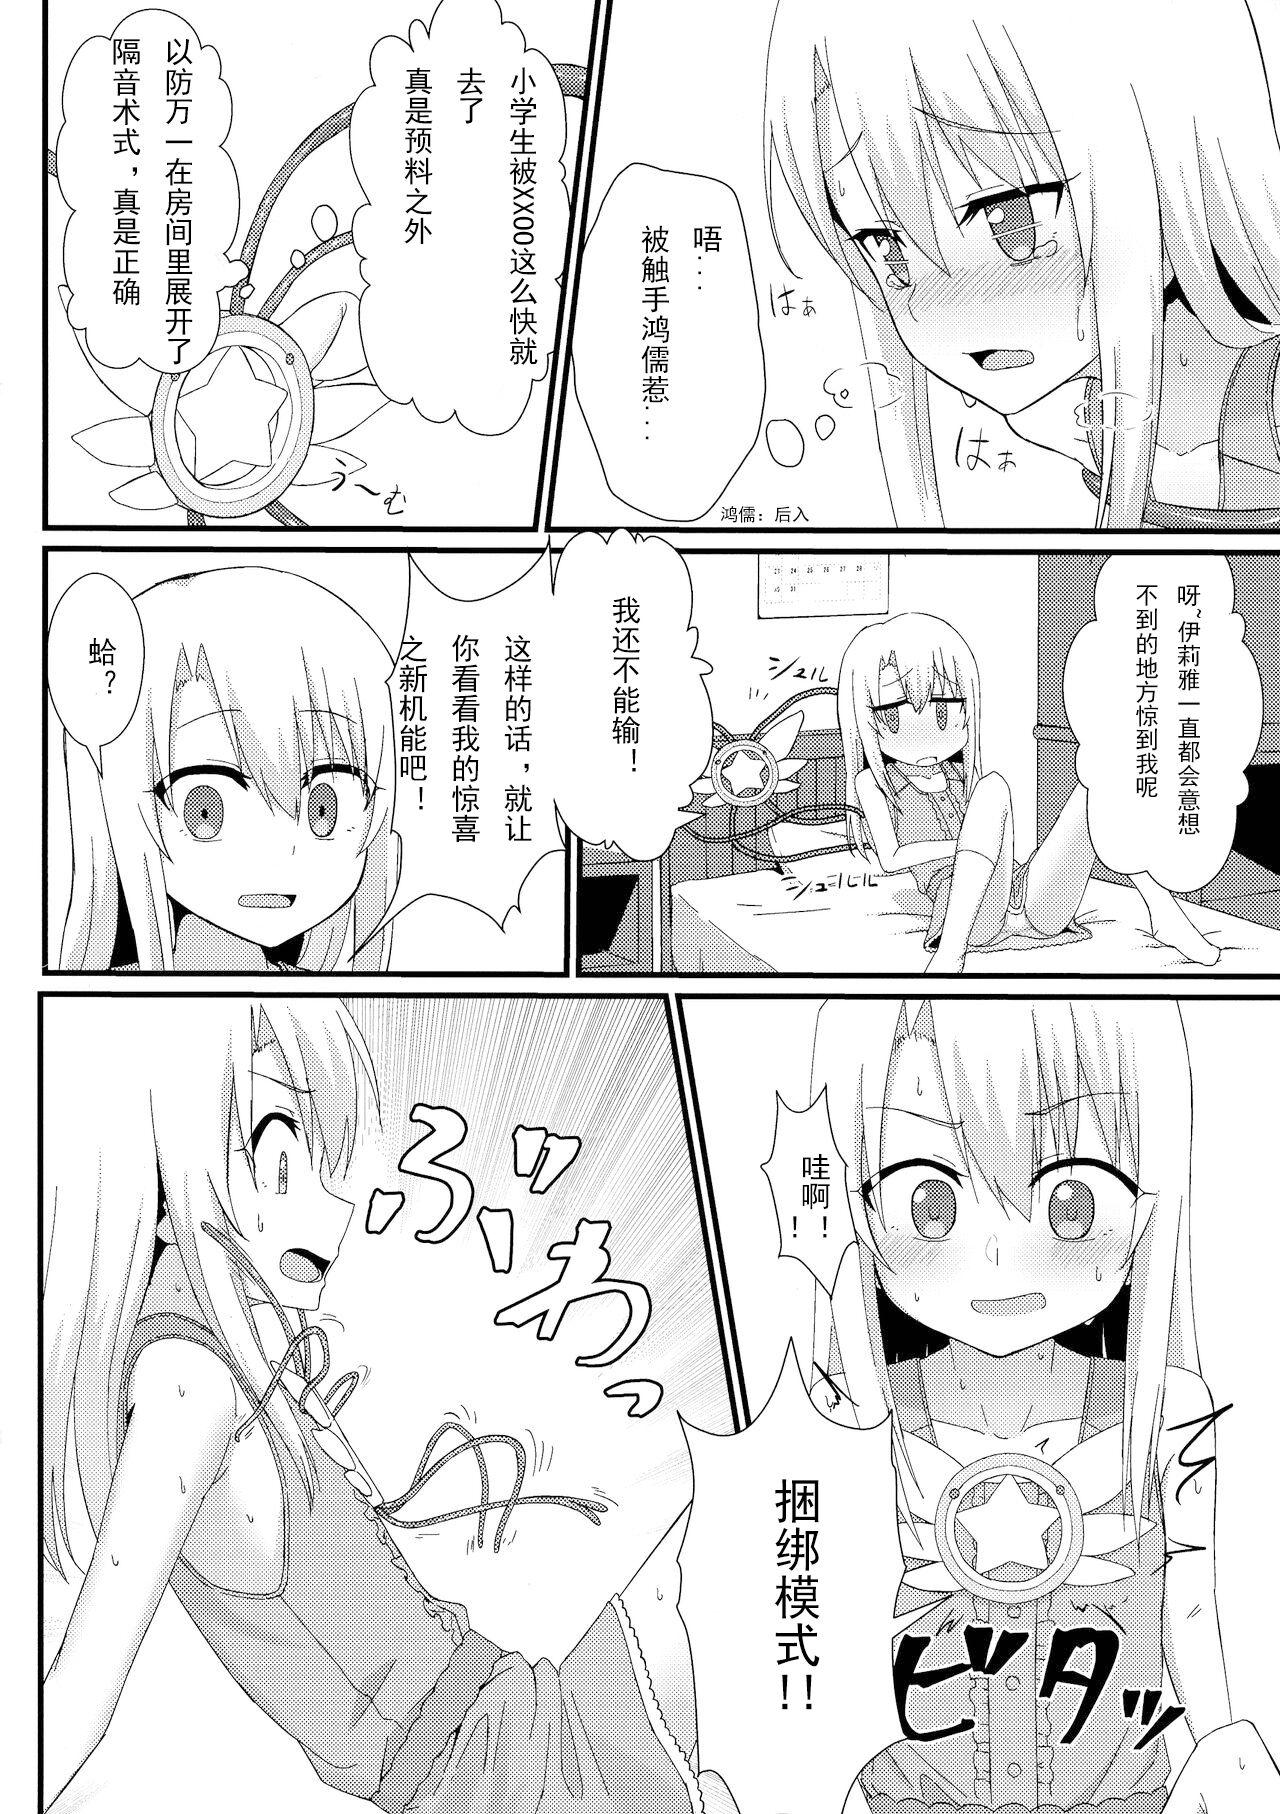 Pete Illya to Ruby Etchi Etchi Secret Function - Fate kaleid liner prisma illya Pain - Page 8